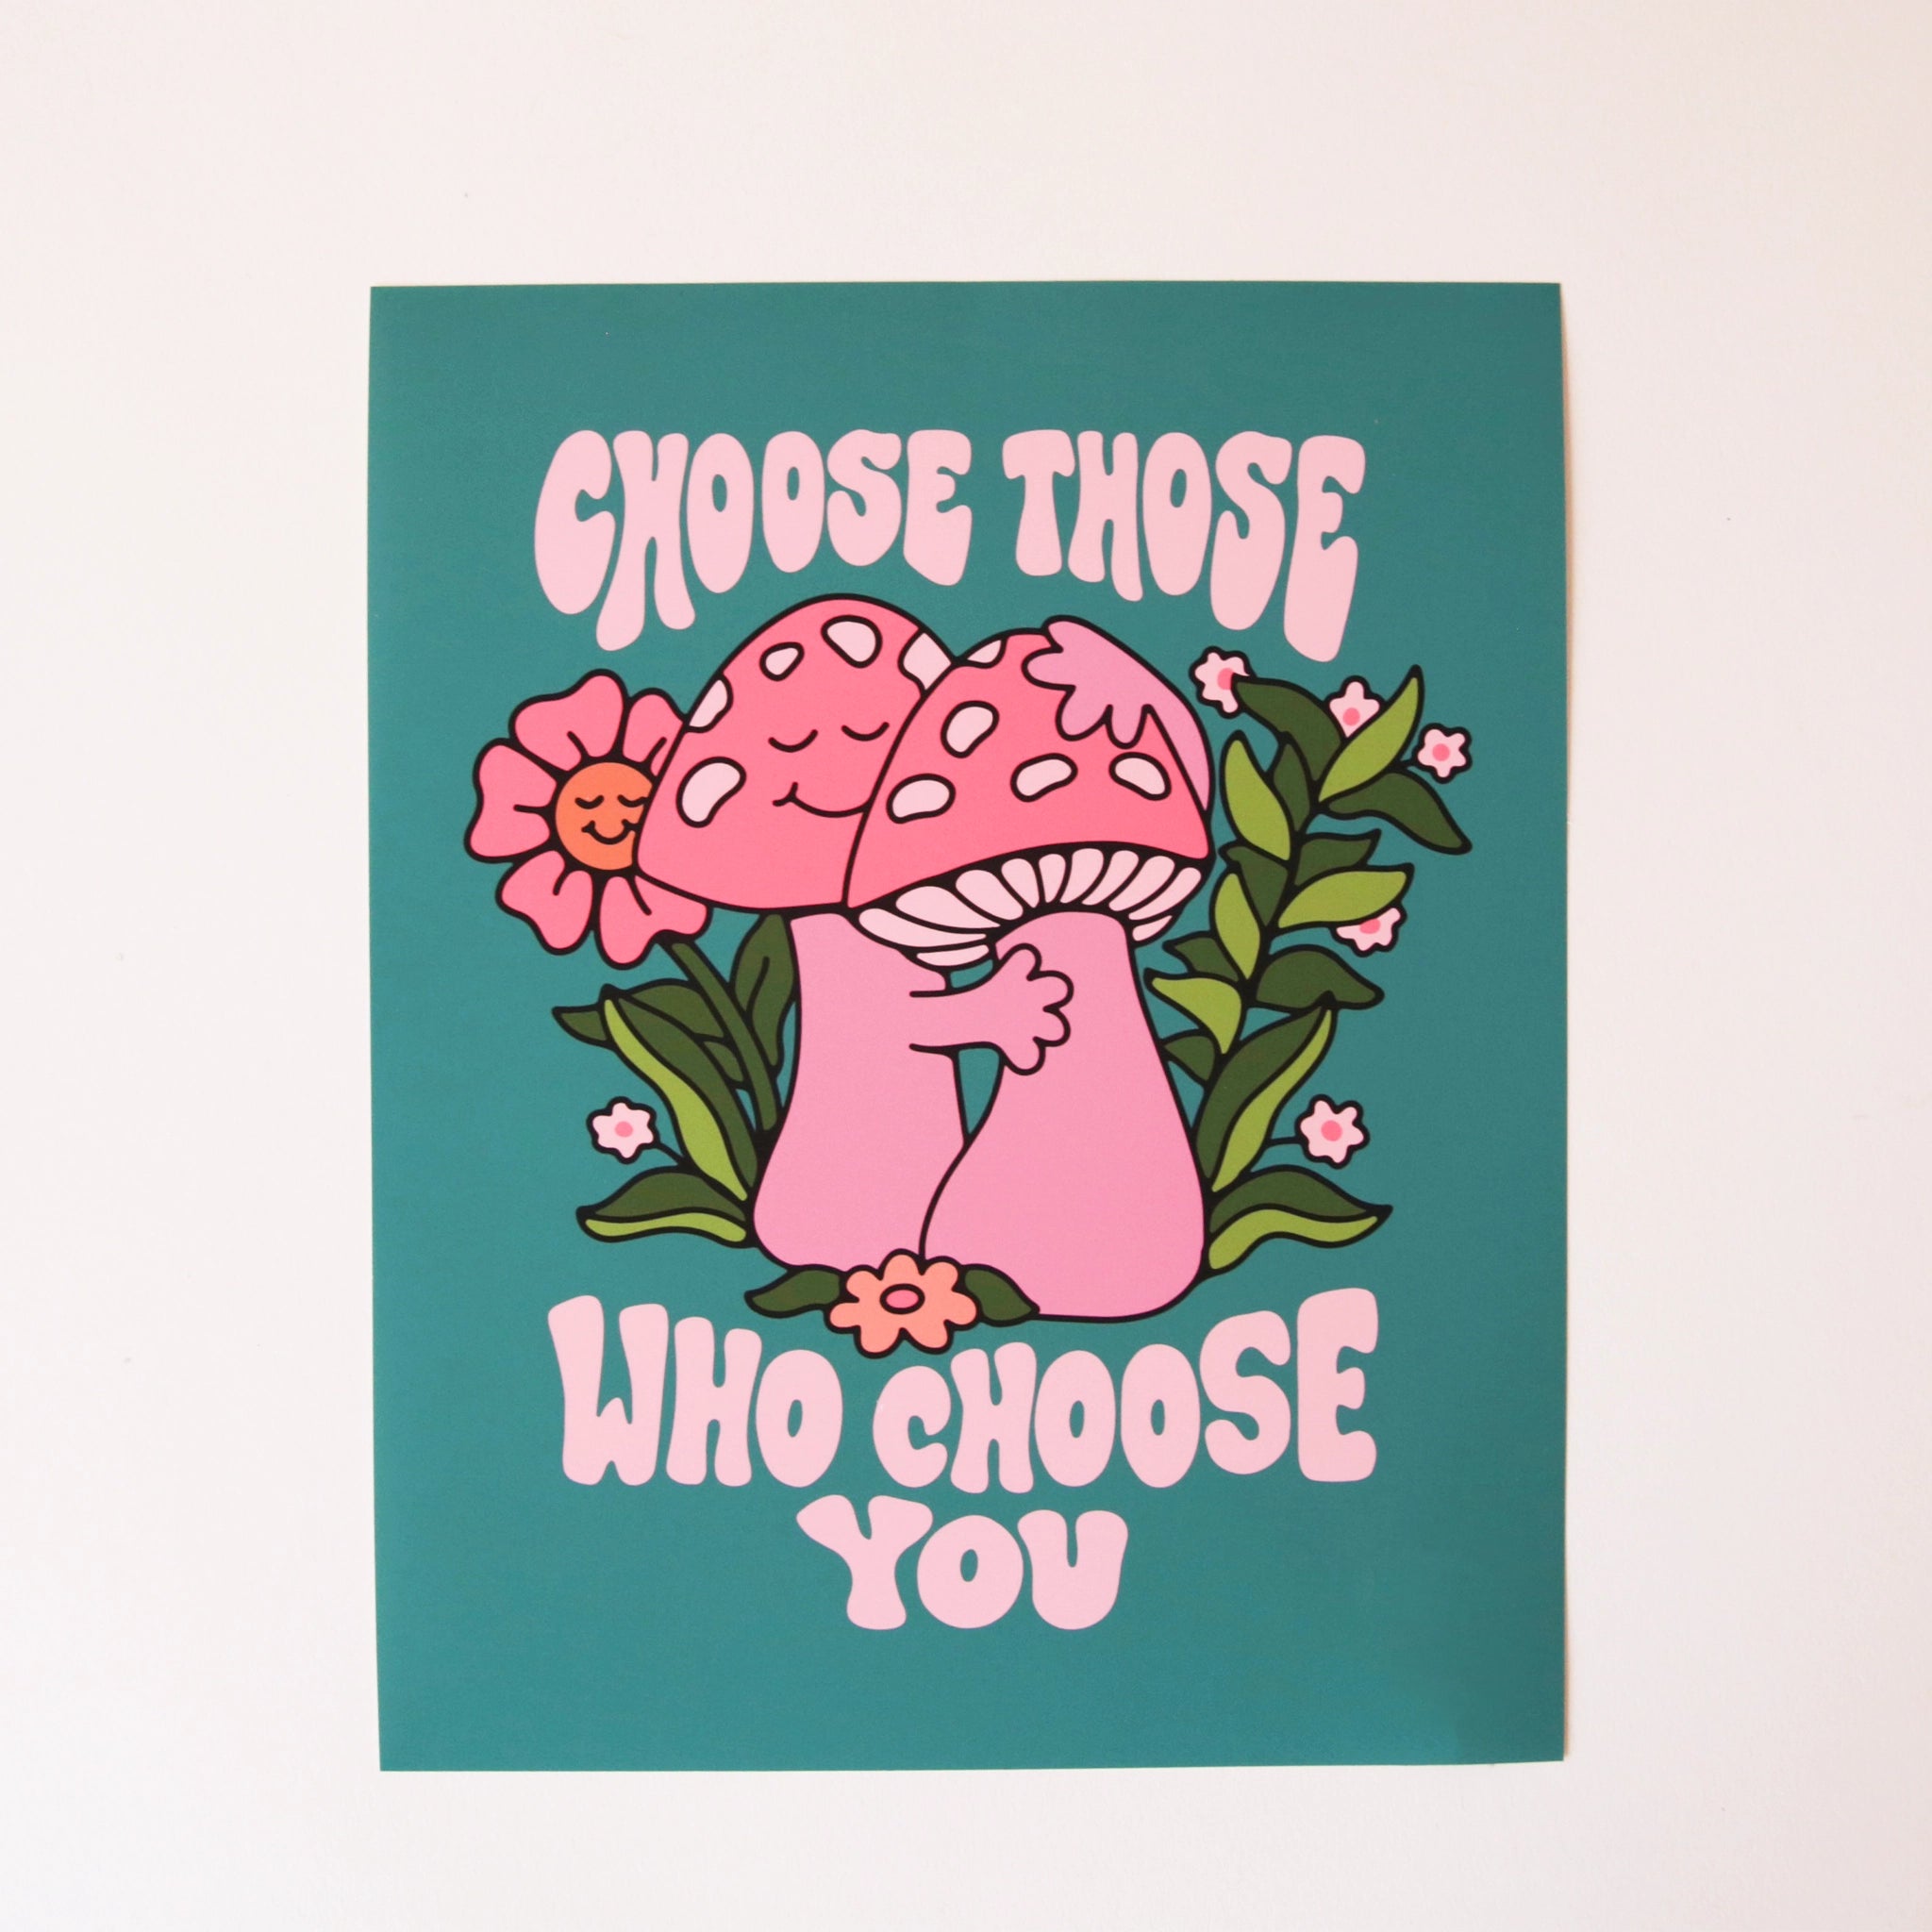 A turquoise blue art print featuring two pink mushrooms giving each other a hug along with a pink smiling daisy in the background, green vines and text above and below the graphic that reads, "Choose Those Who Choose You" in light pink.